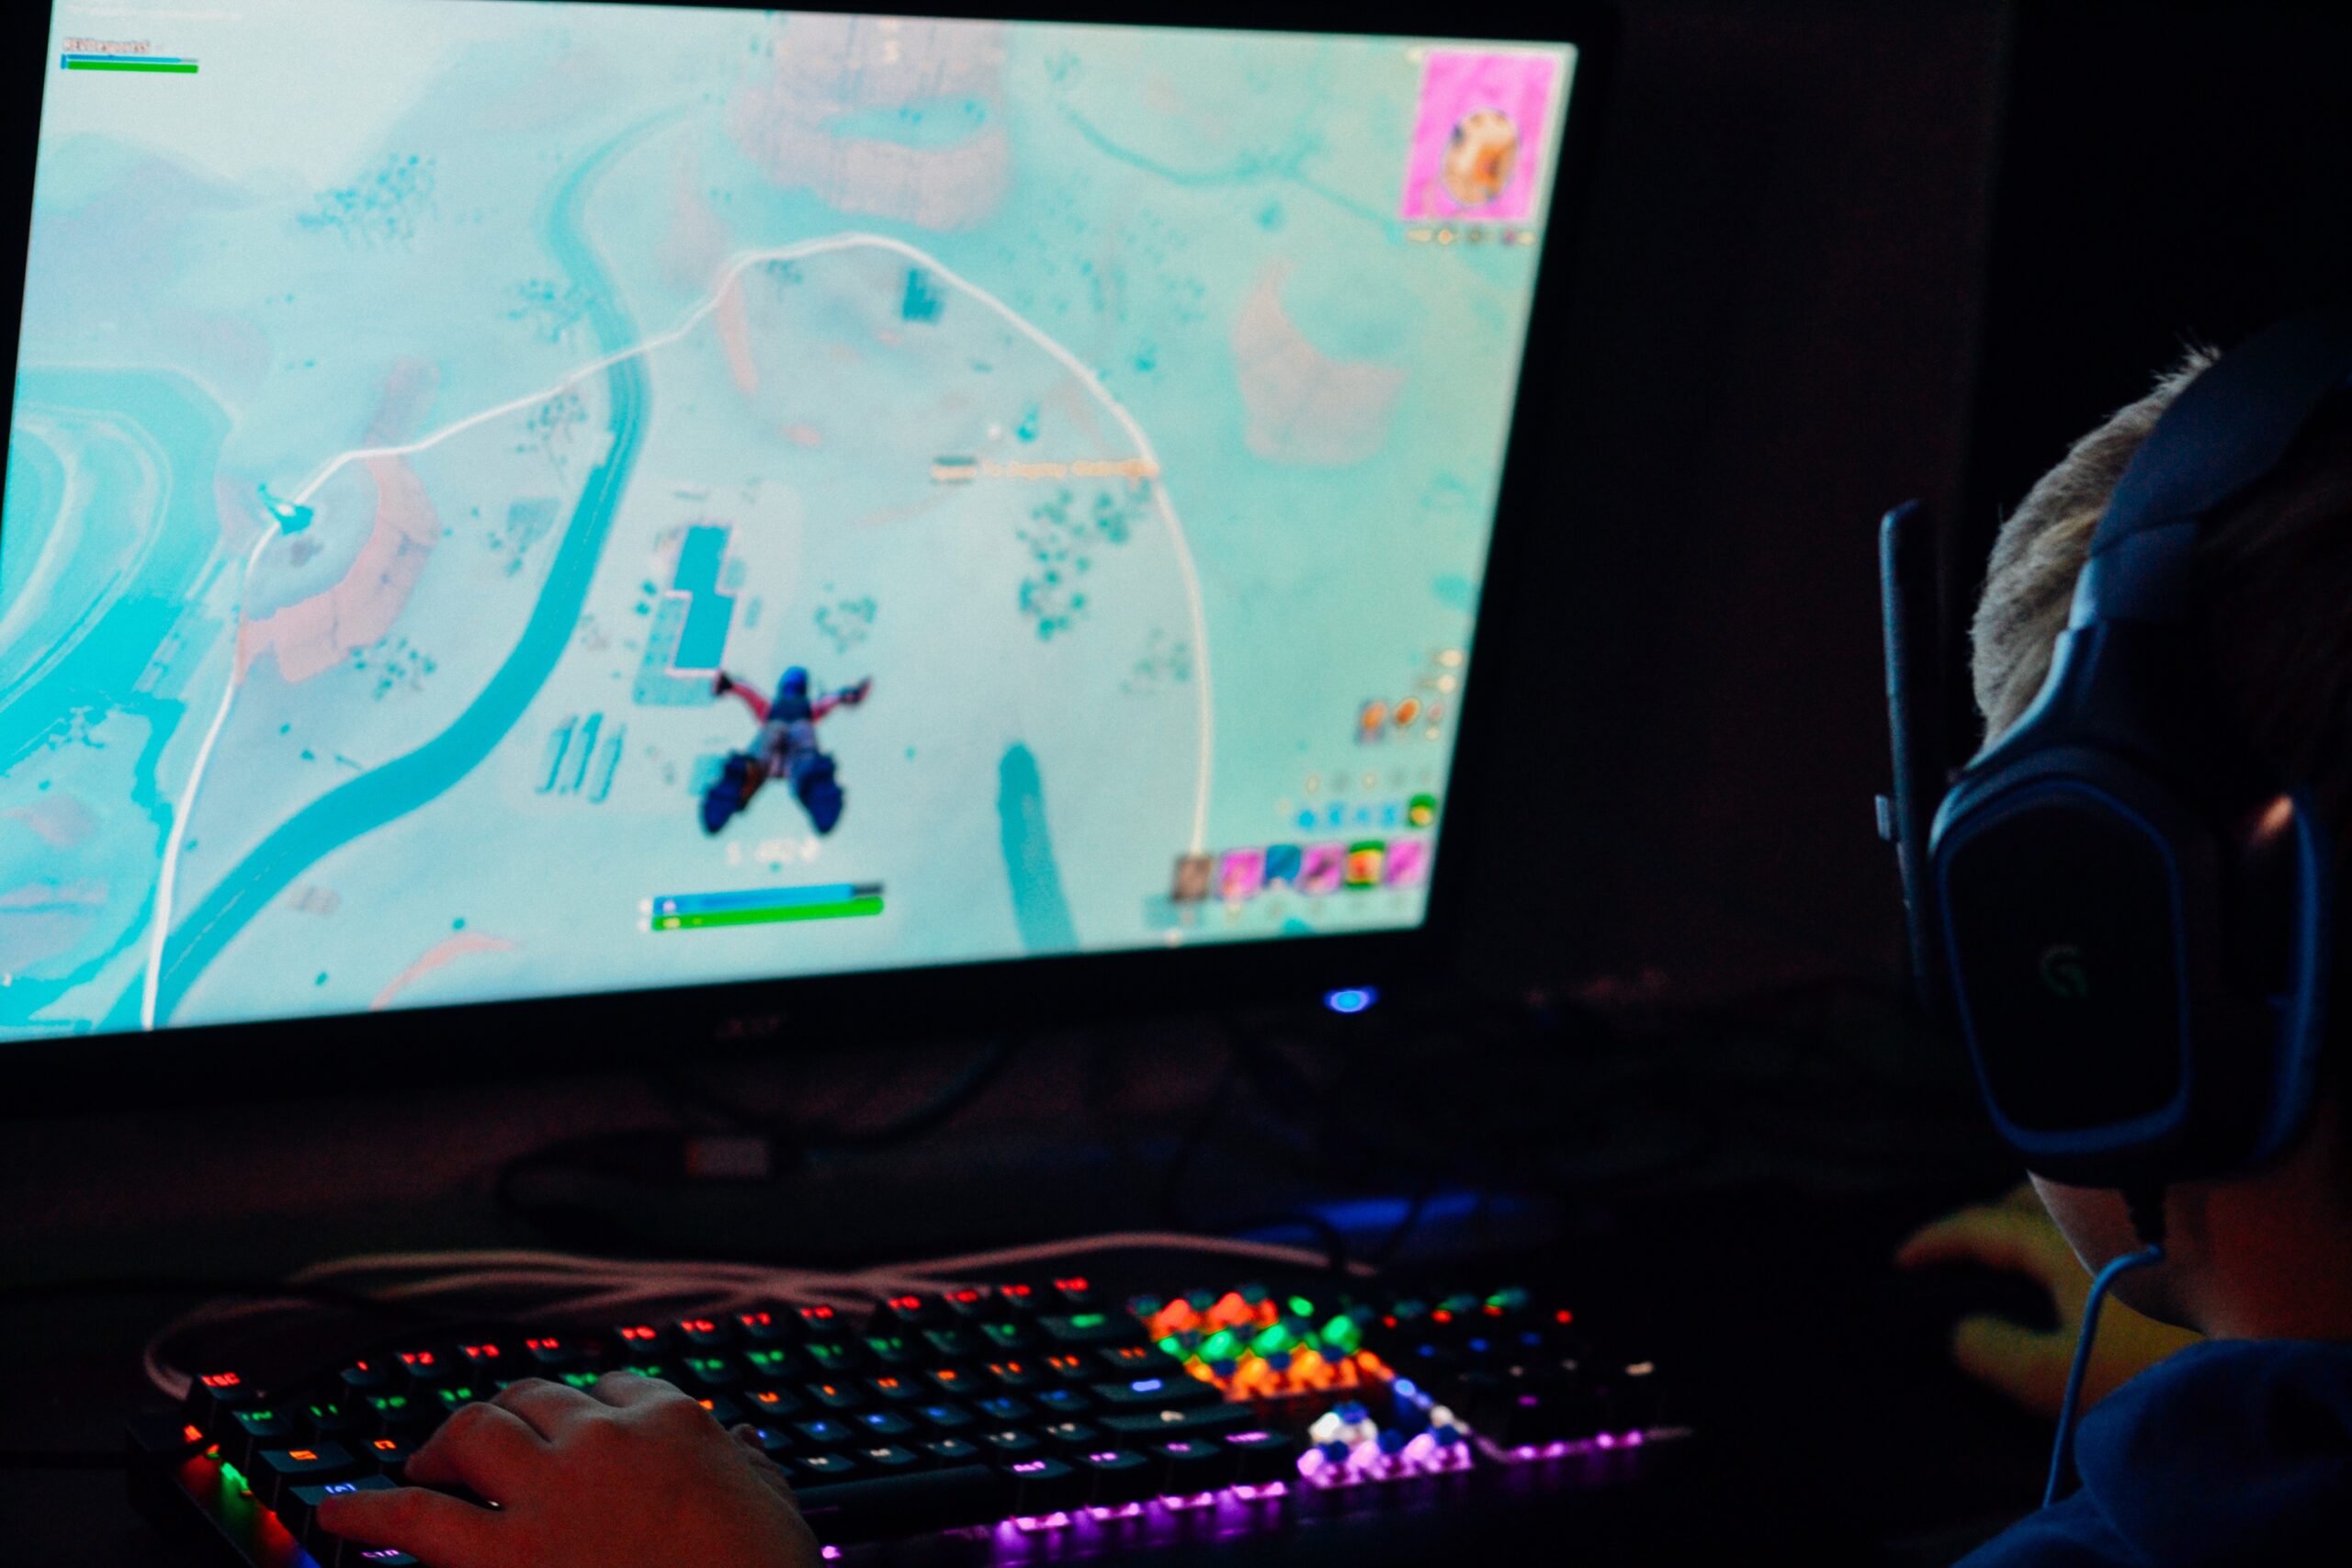 Fortnite on a gaming PC